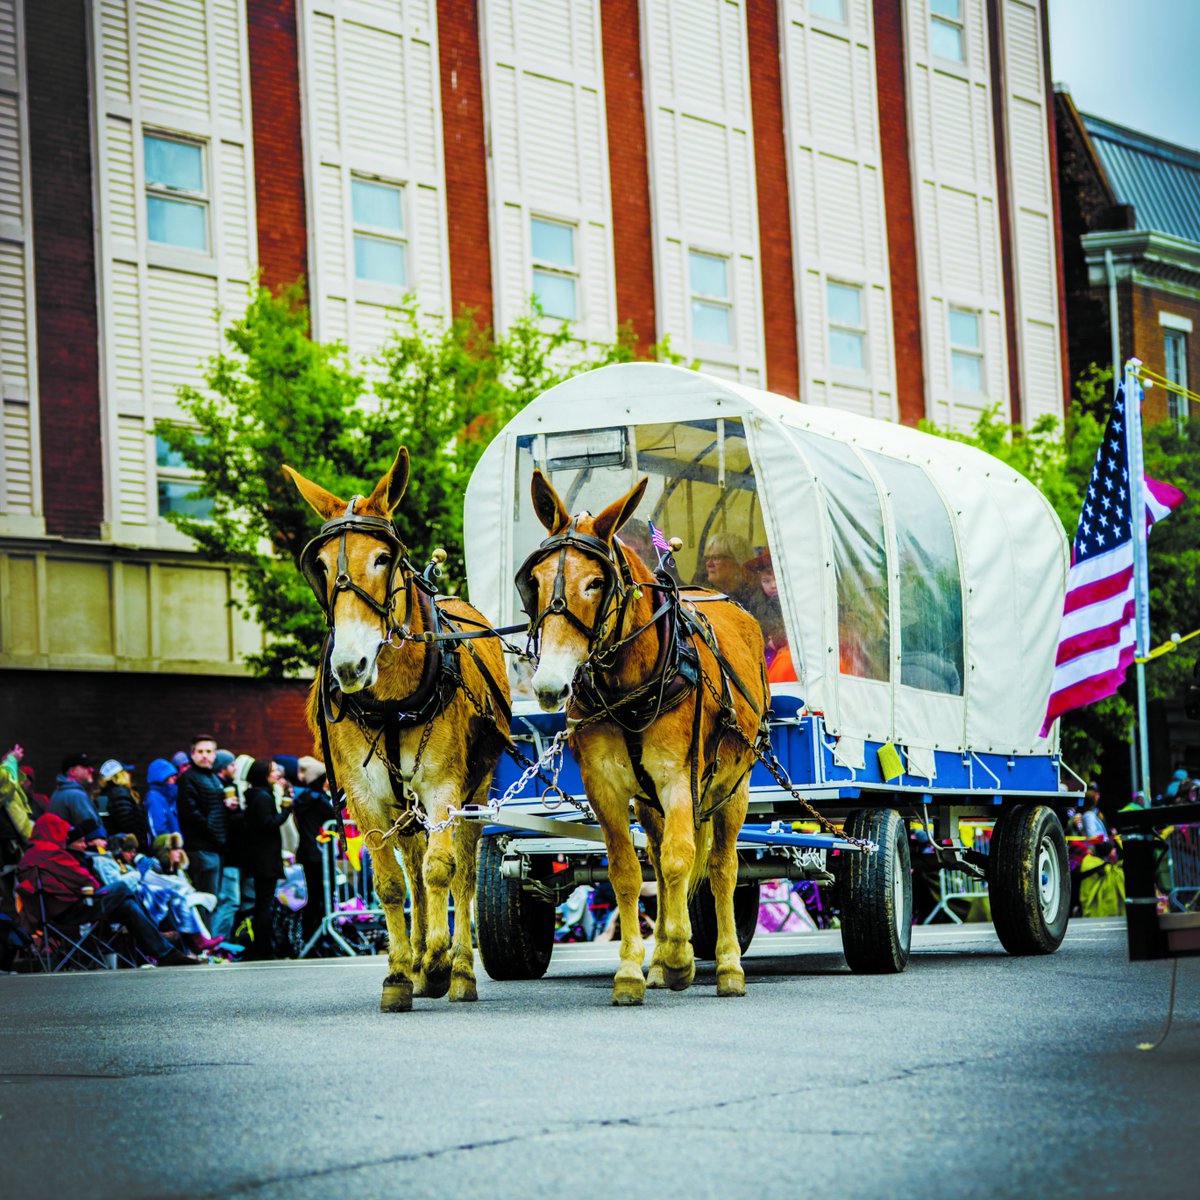 Get prepped for this weekend's Mule Day celebration in @VisitColumbiaTN with tips on where to go: bit.ly/4apNjGA 📸: Journal Communications Inc/Nick Bumgardner #TNSoundsPerfect